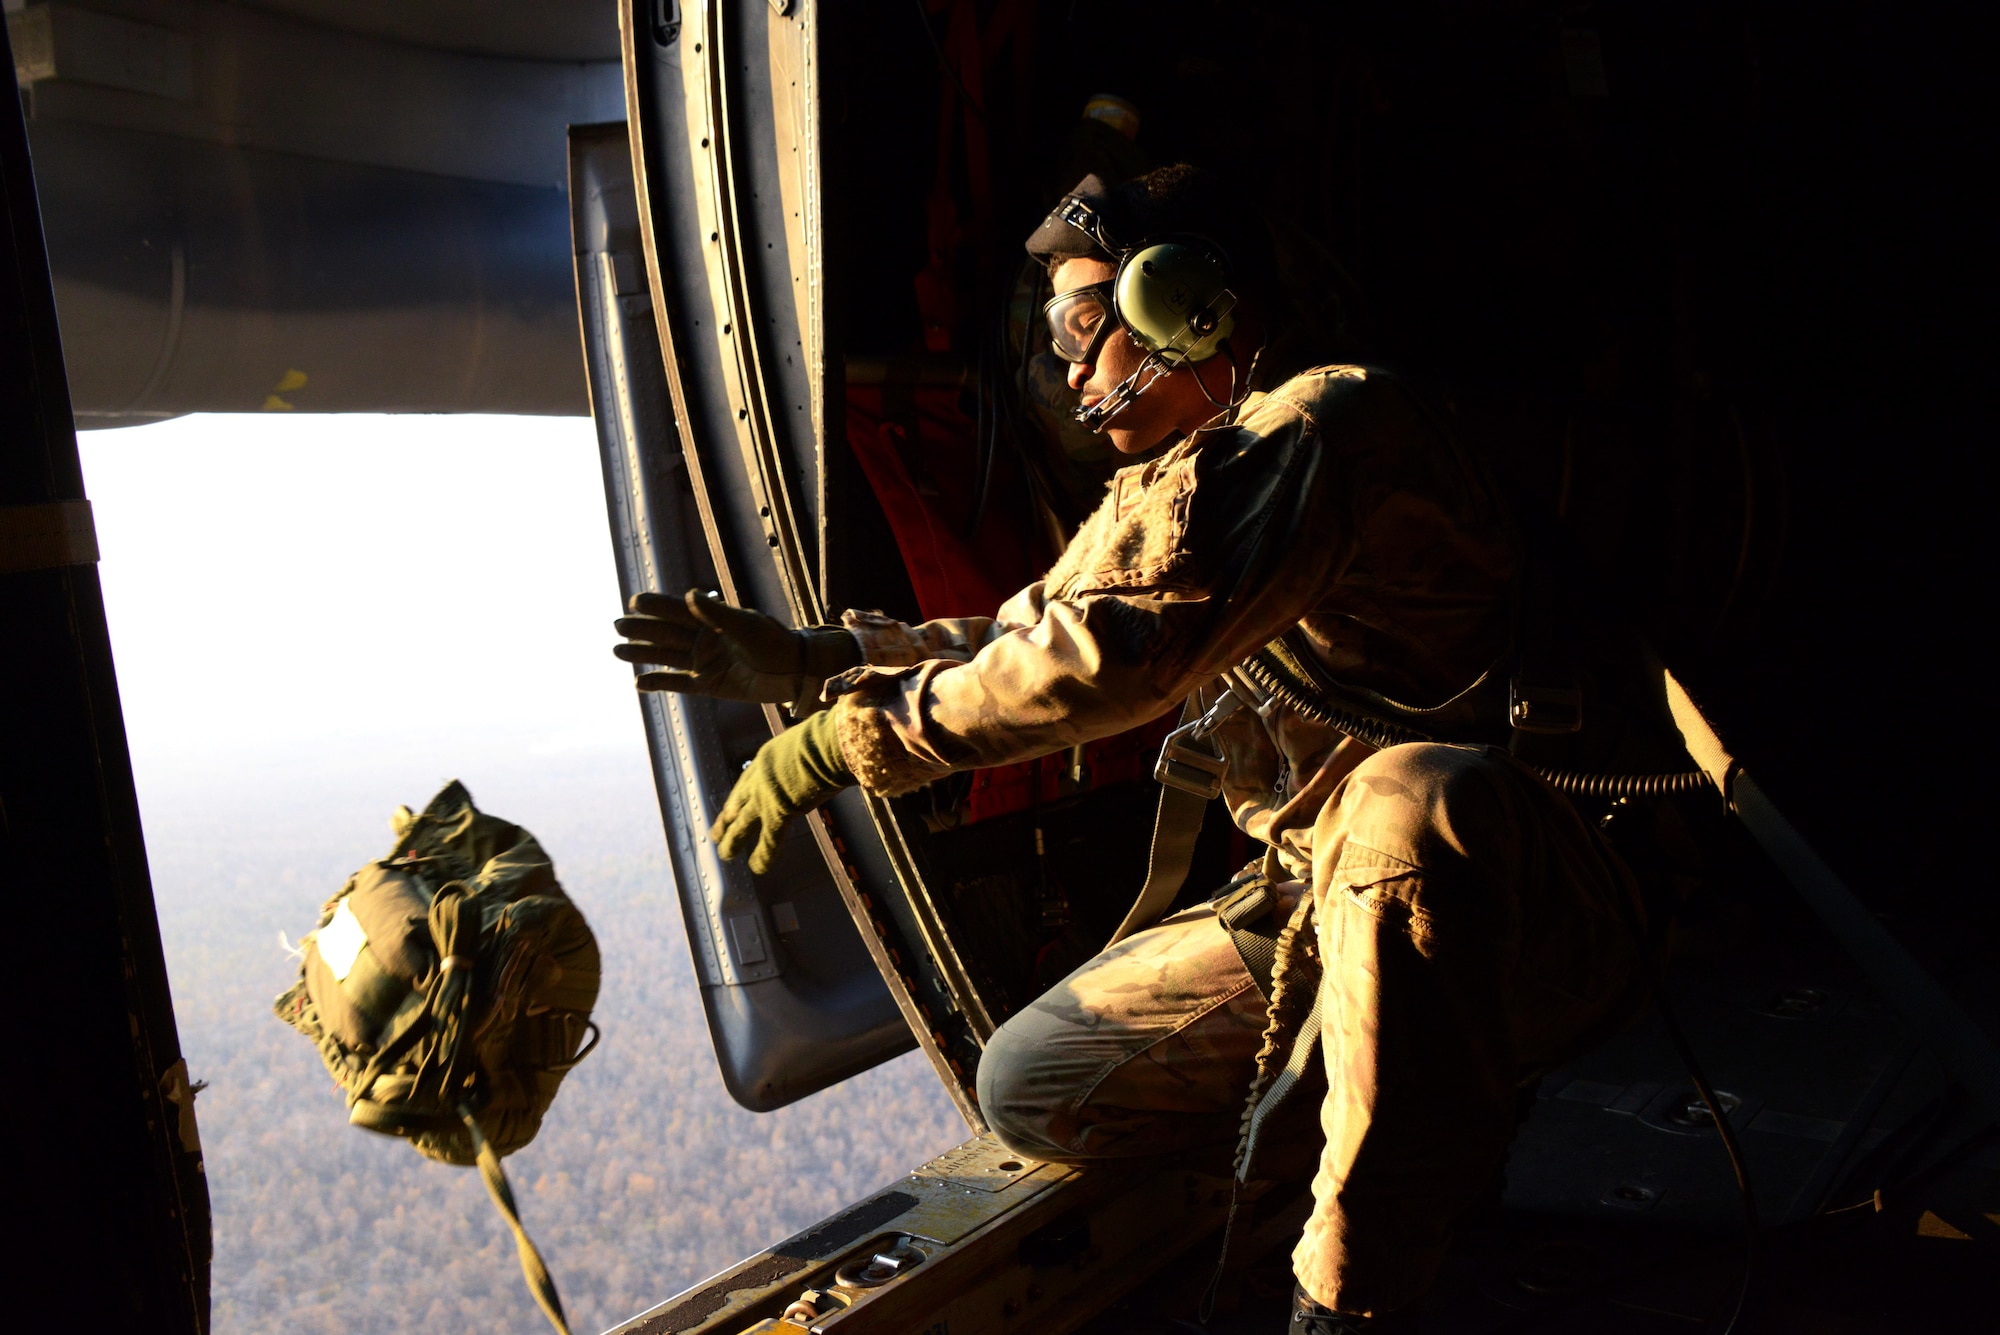 Tech. Sgt. David Wheeler, a loadmaster from the 17th Special Operations Squadron, drops a simulated airdrop training bundle from an MC-130P Combat Shadow over a drop zone near Udon Thani, Thailand. The MC-130P Combat Shadows from the 17th SOS are part of the 353rd Special Operations Group detachment from Kadena Air Base, Japan, in Thailand to participate in Exercise Teak Torch.  (U.S. Air Force photo by Tech. Sgt. Kristine Dreyer)